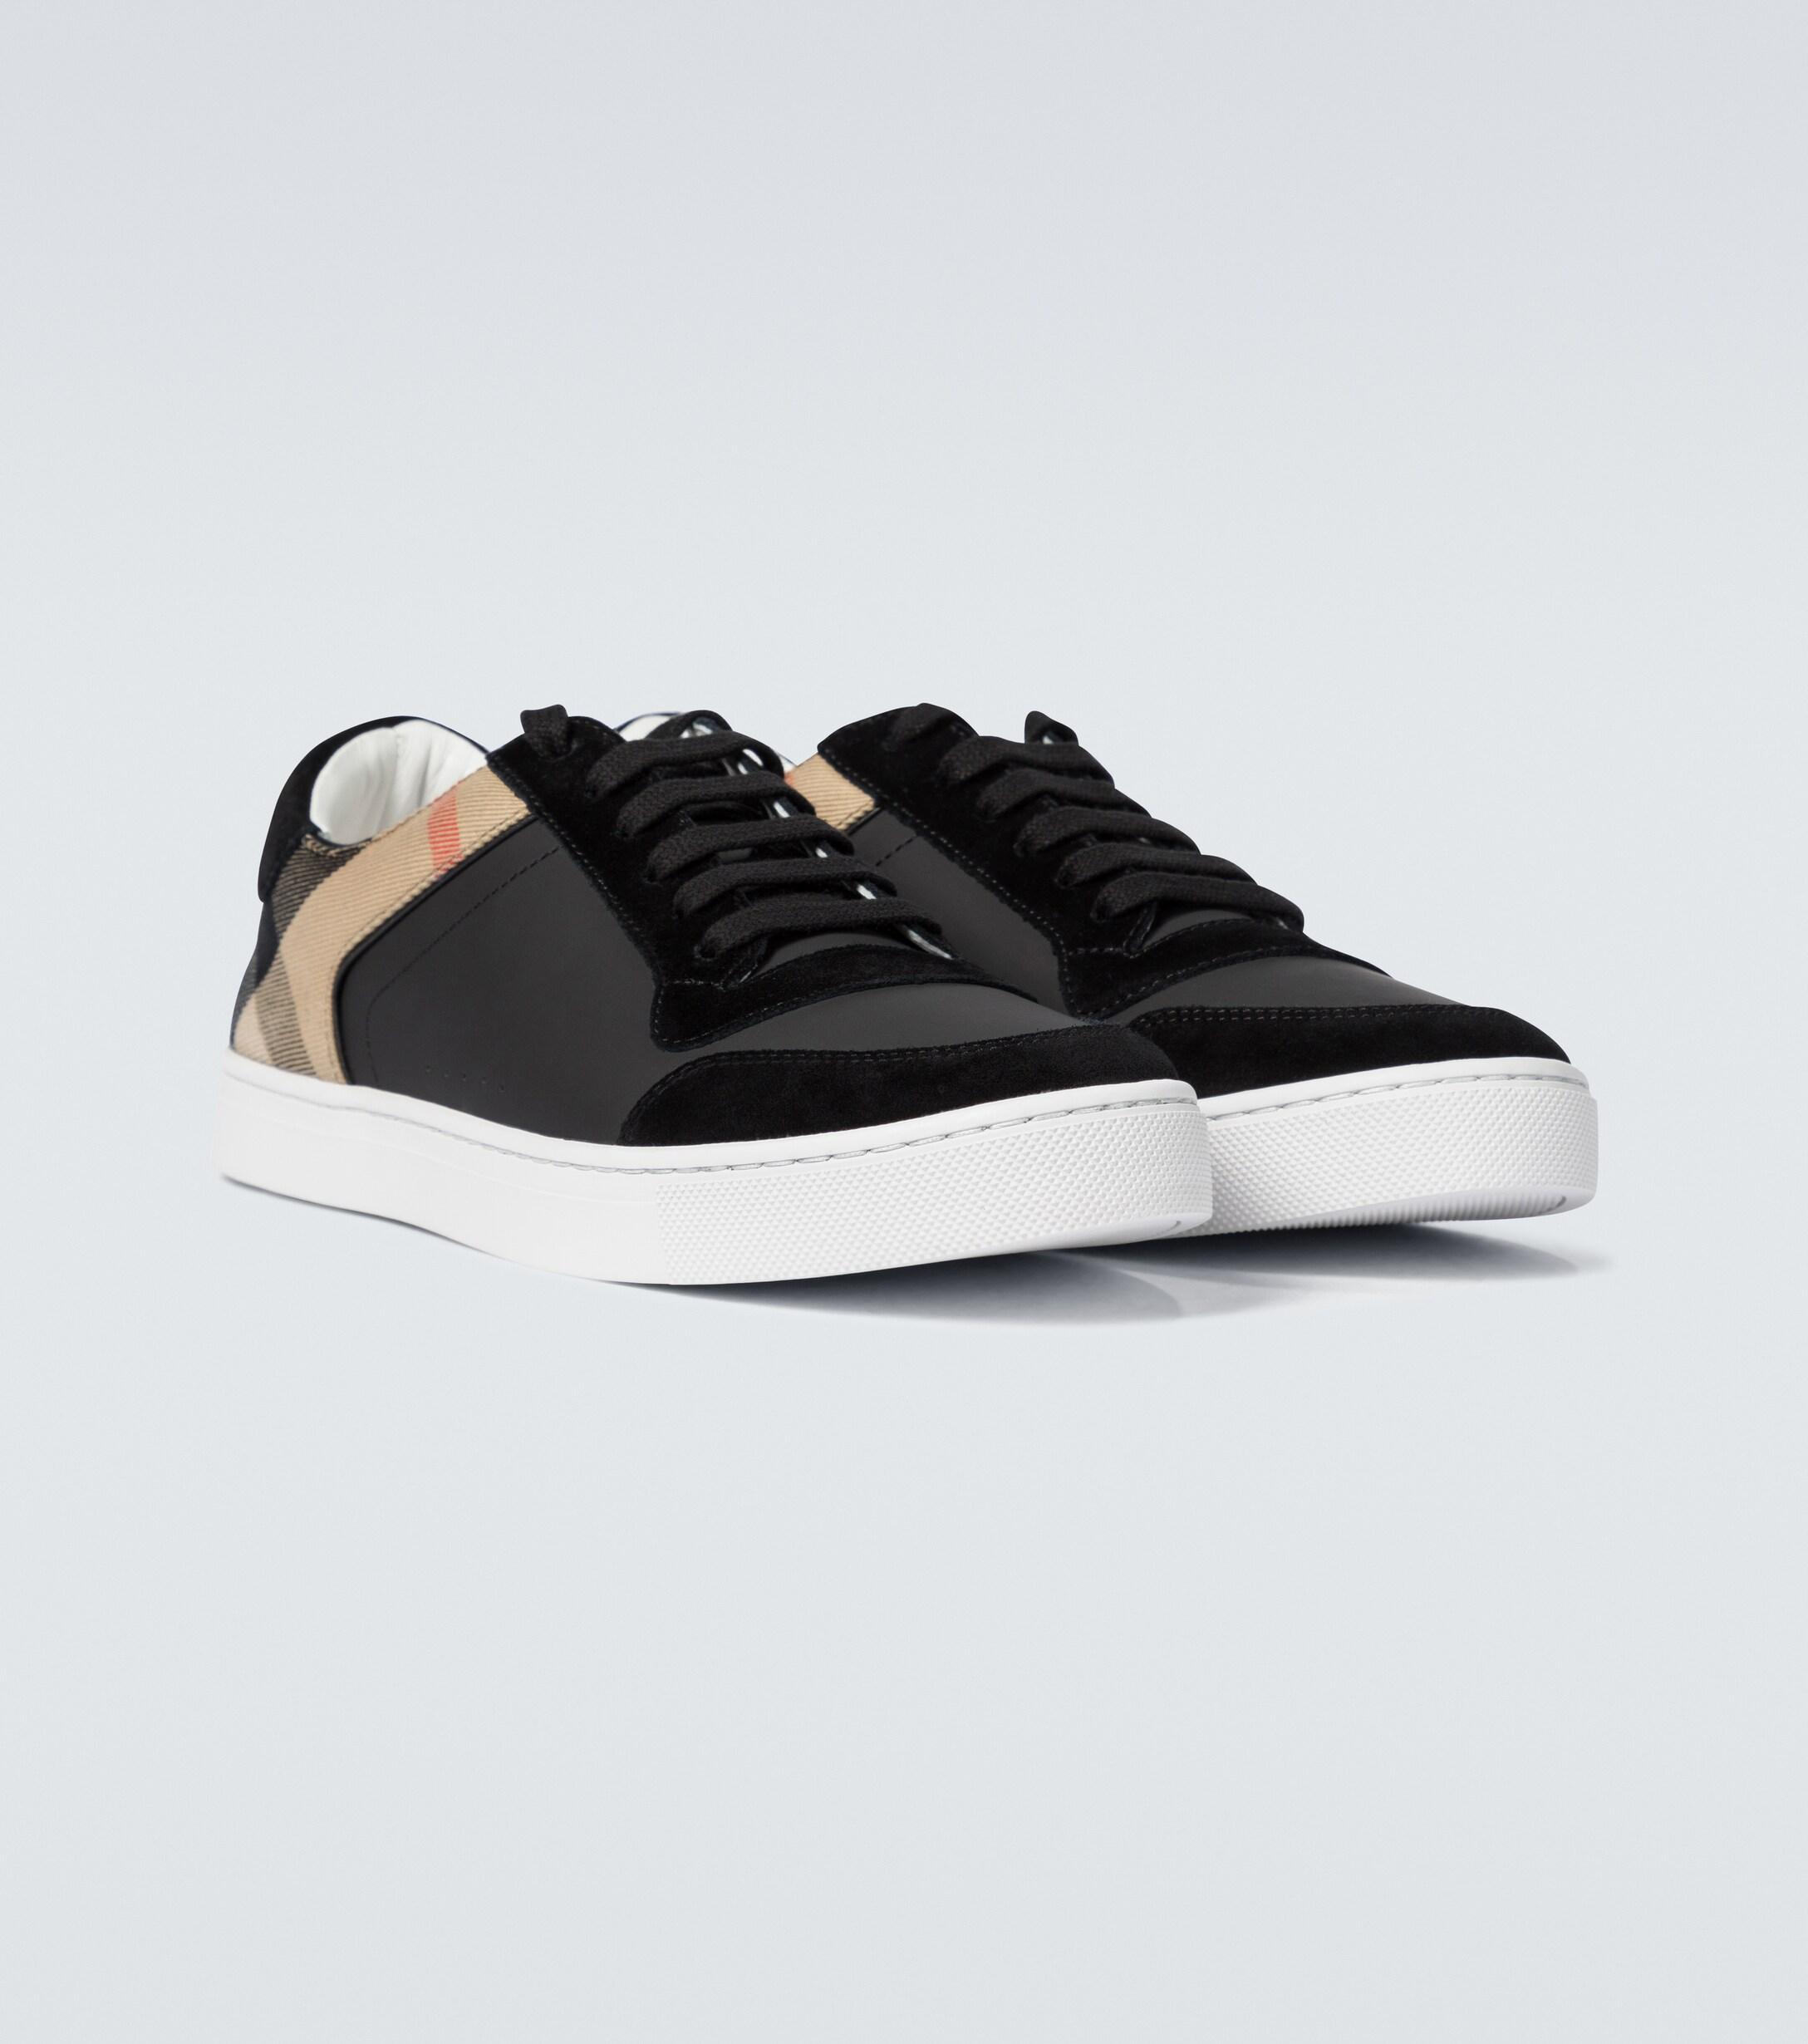 Burberry Reeth Checked Leather Sneakers in Black for Men - Lyst